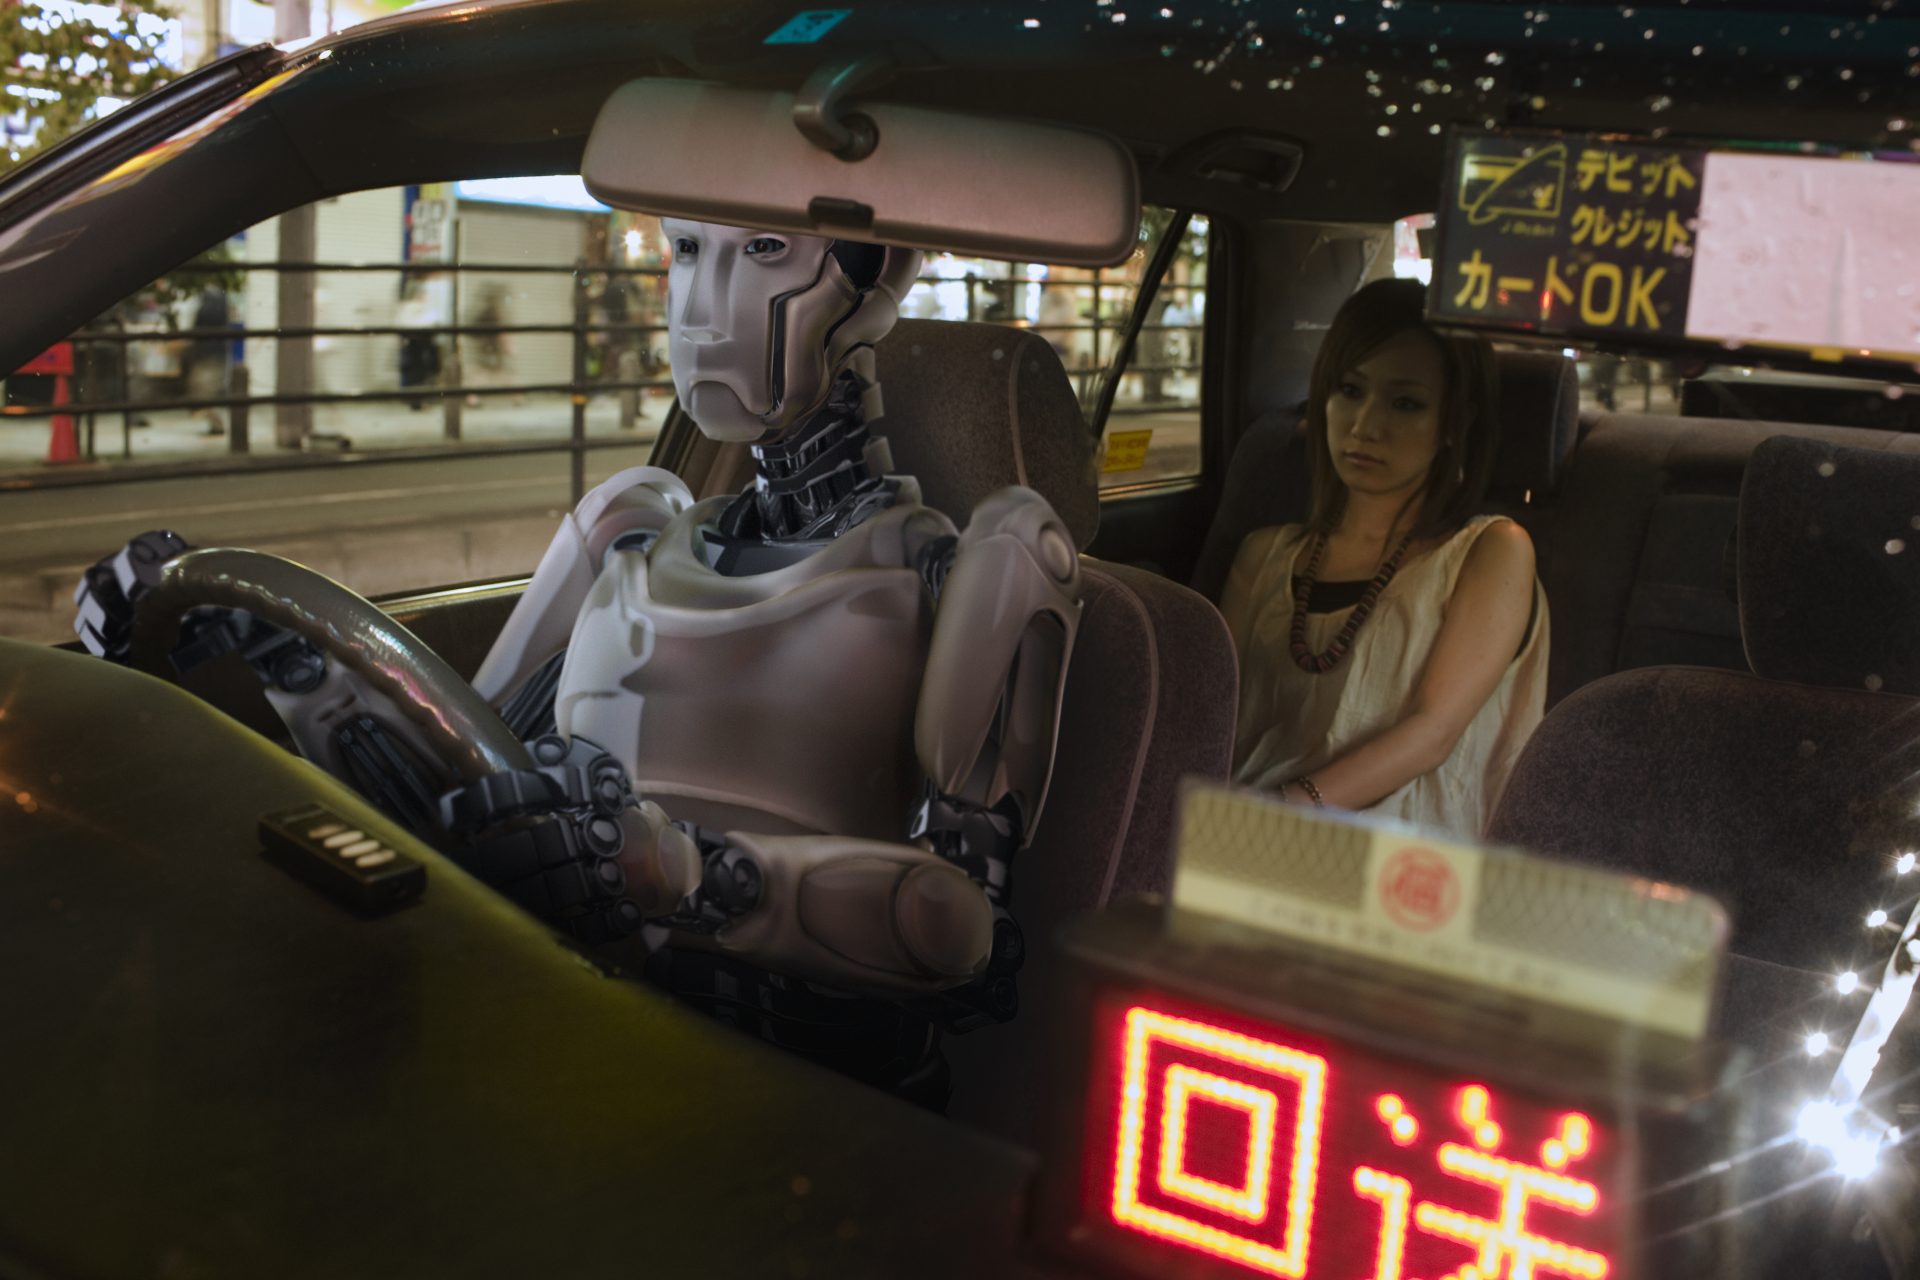 Robotaxis are hitting US streets and people are protesting them